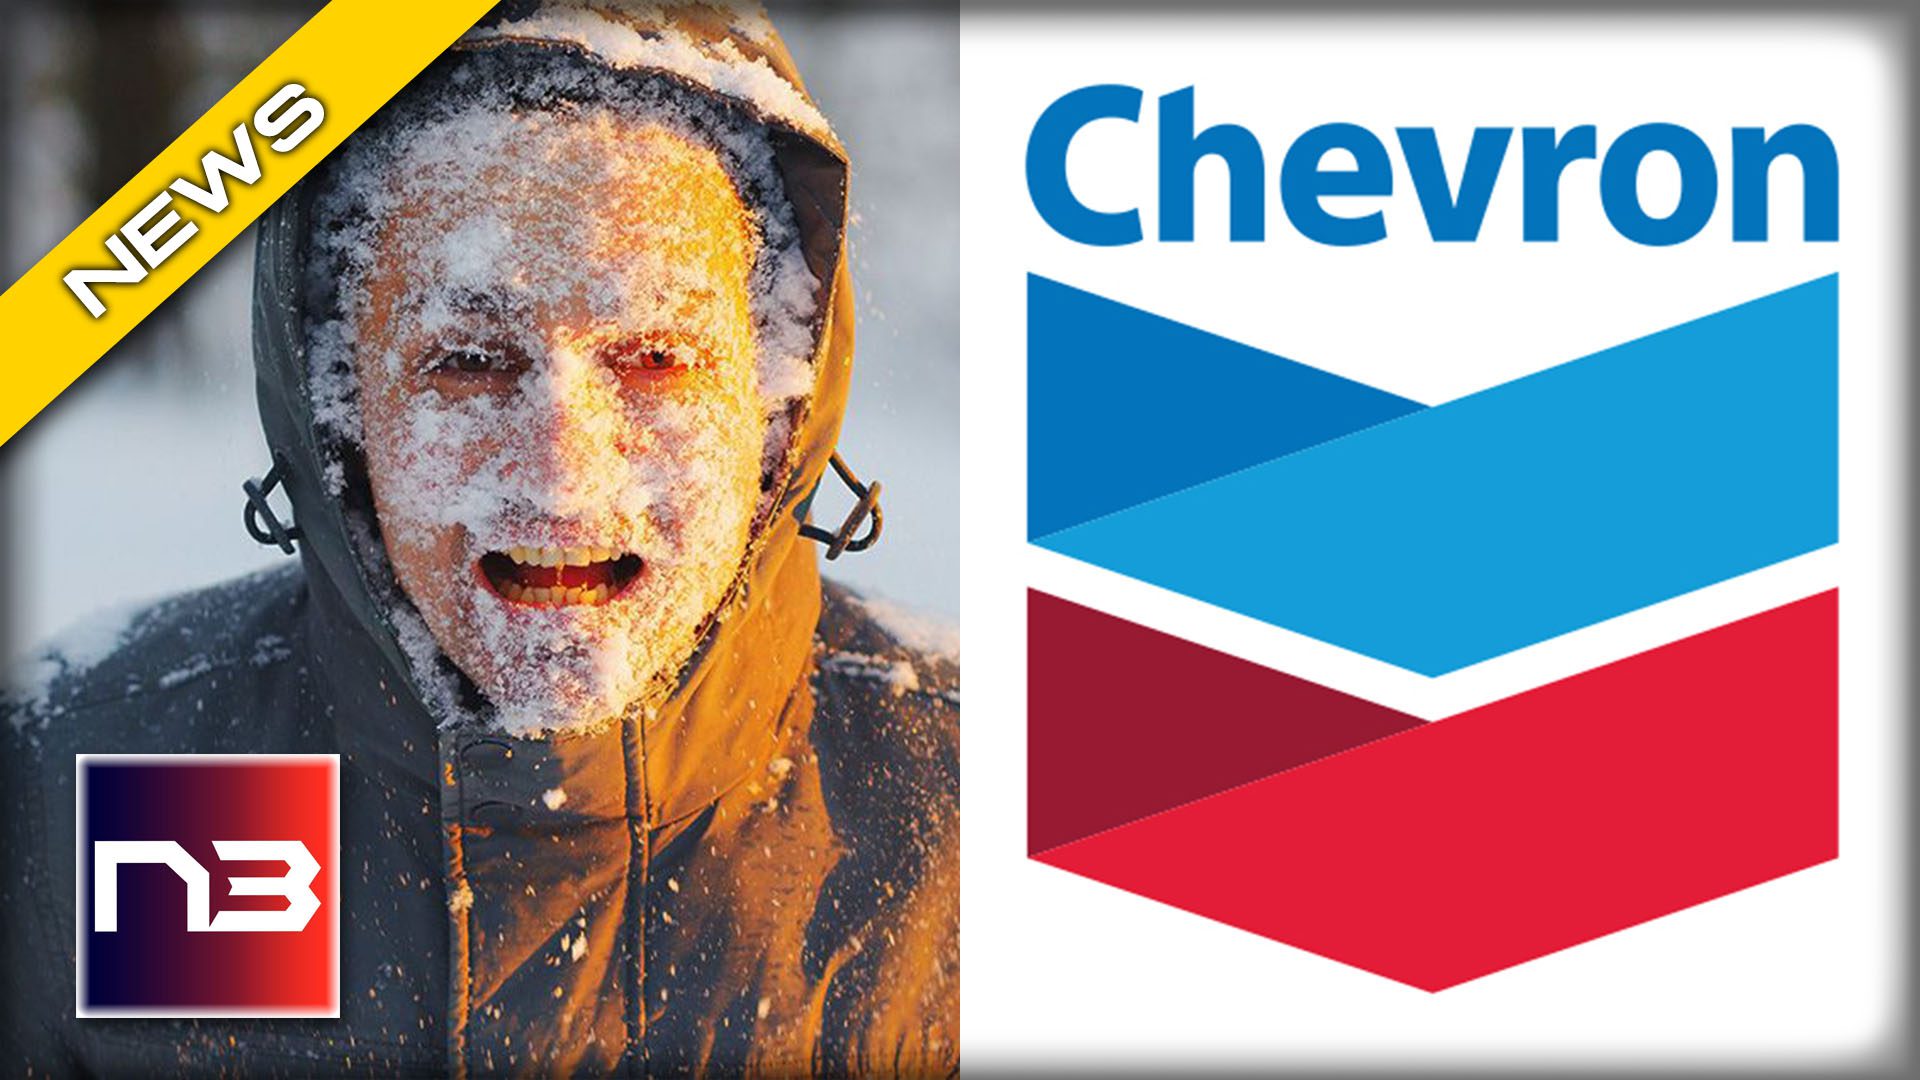 Chevron CEO WARNS Of Looming Natural Gas CRISIS Here In America